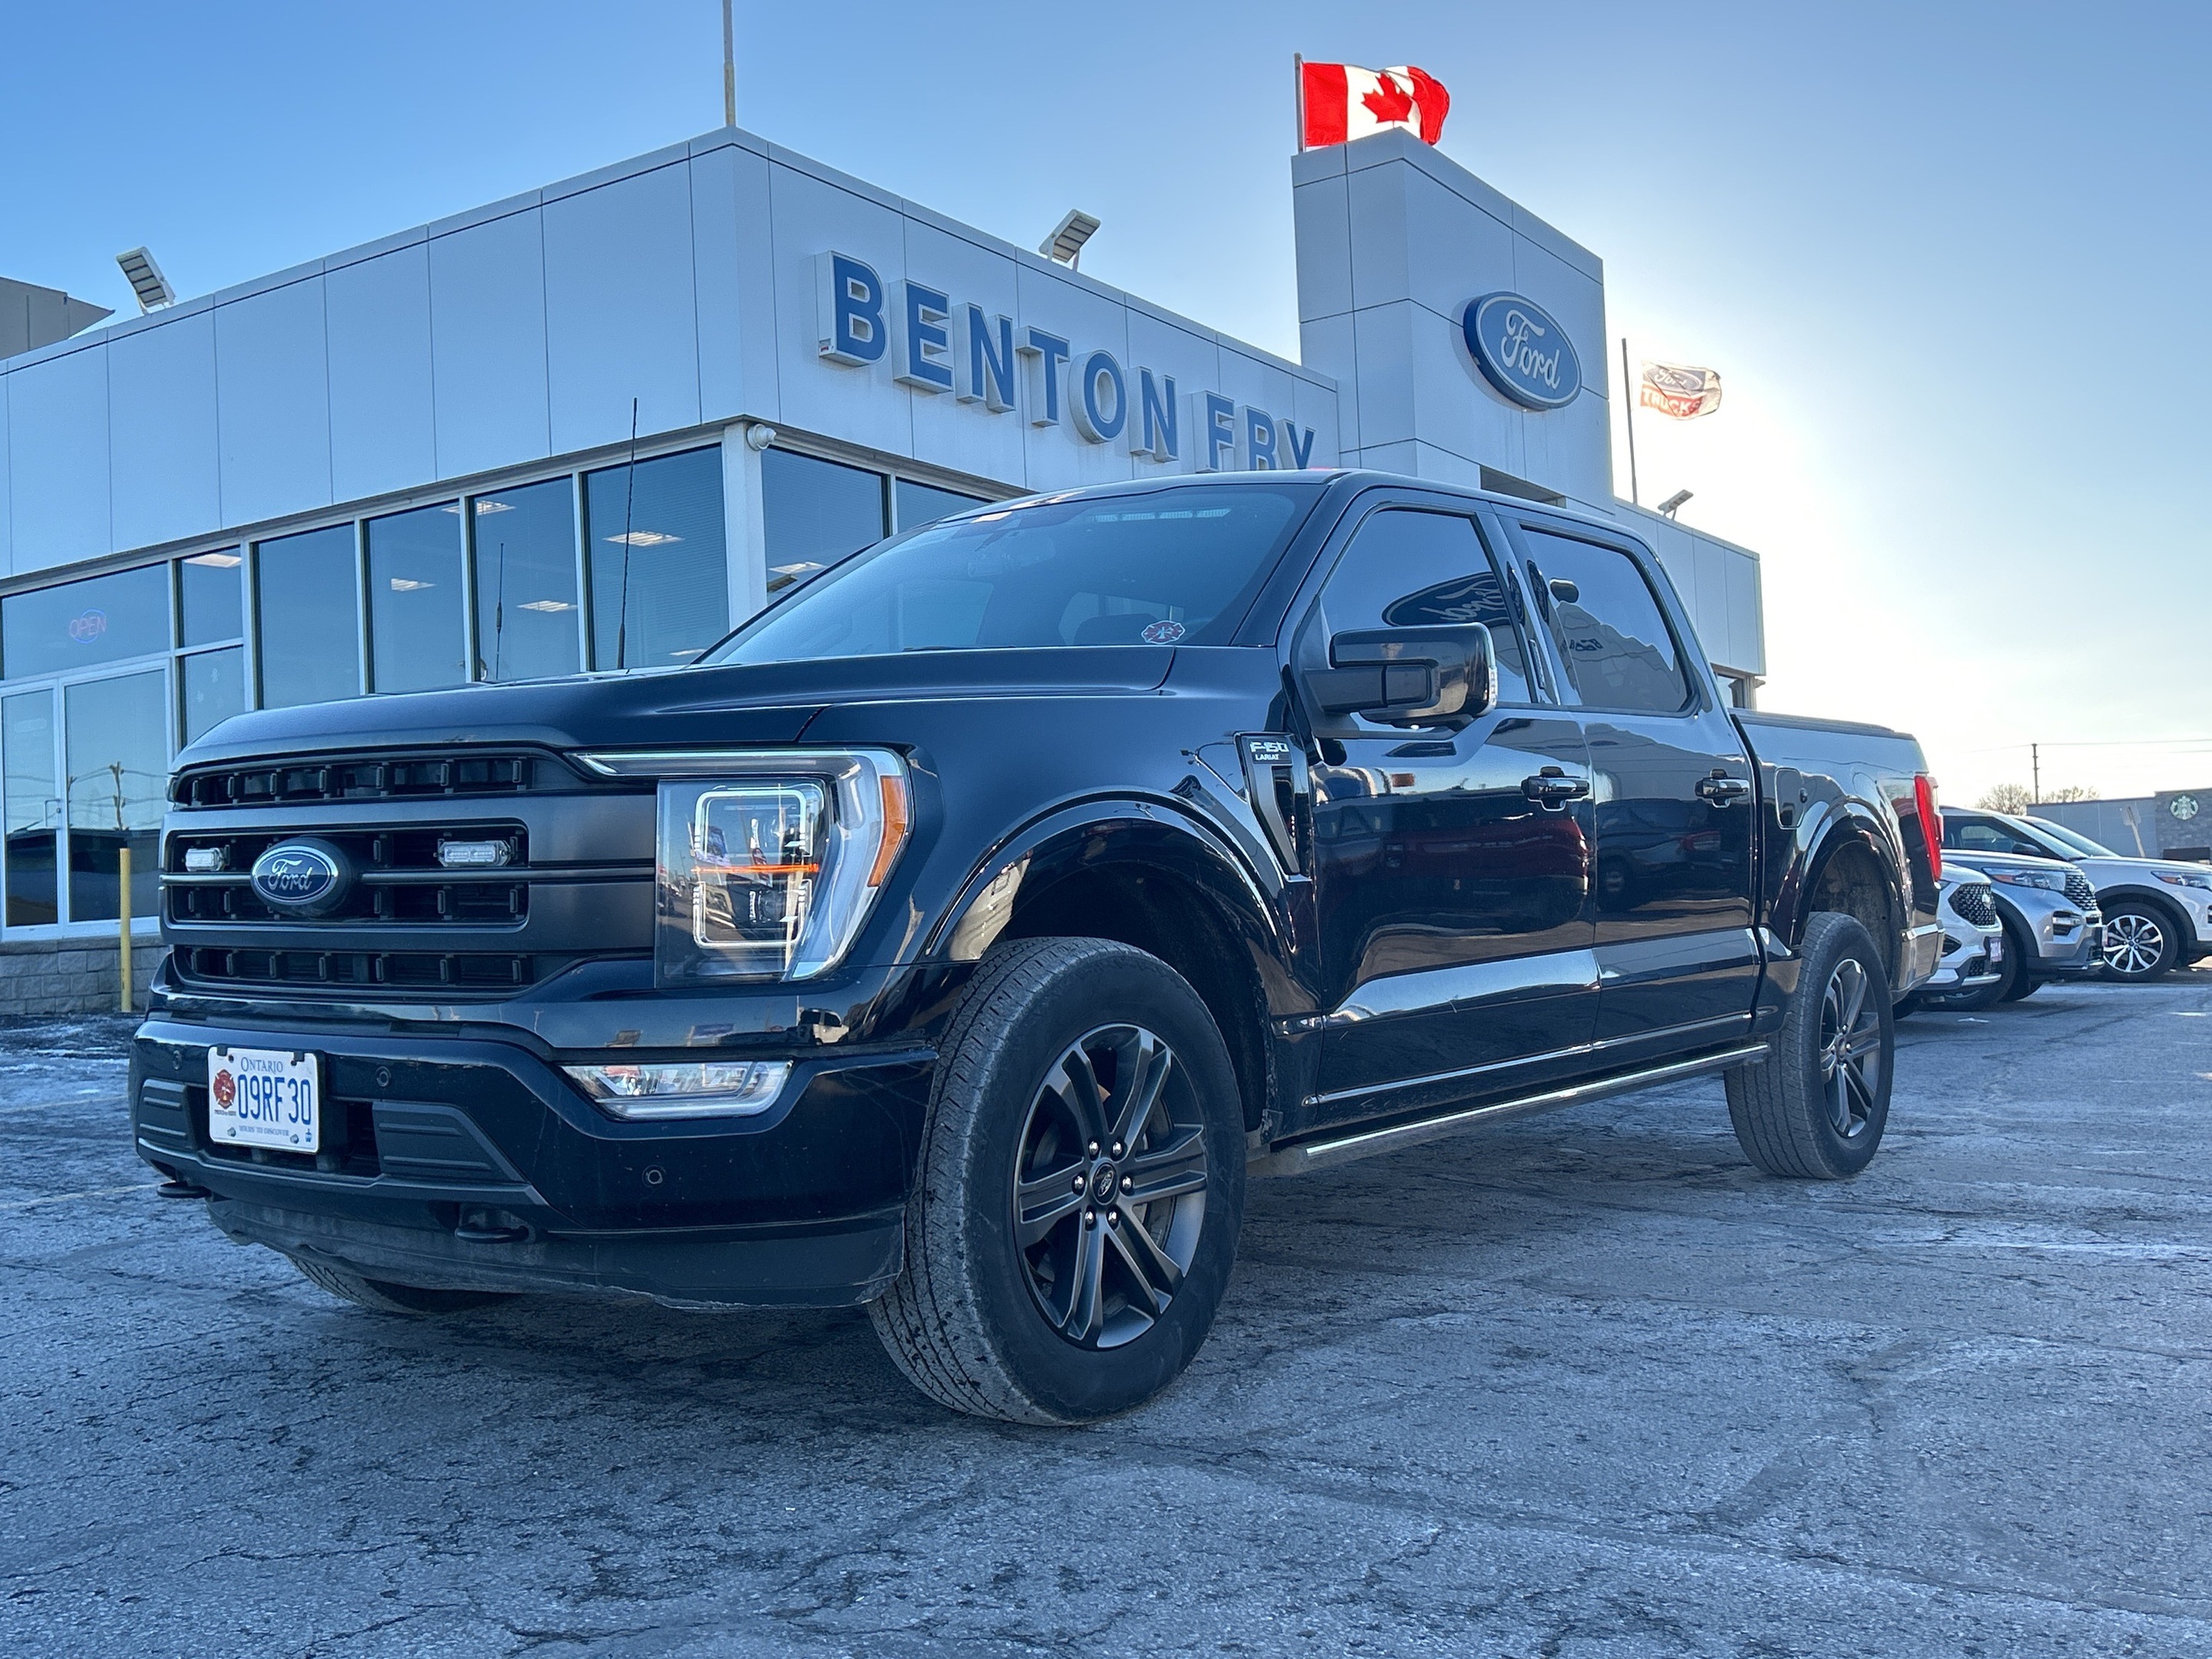 2022 Ford F-150 Lariat - ONE OWNER 3.5L LOADED SPORT FX4 WITH 3.5L